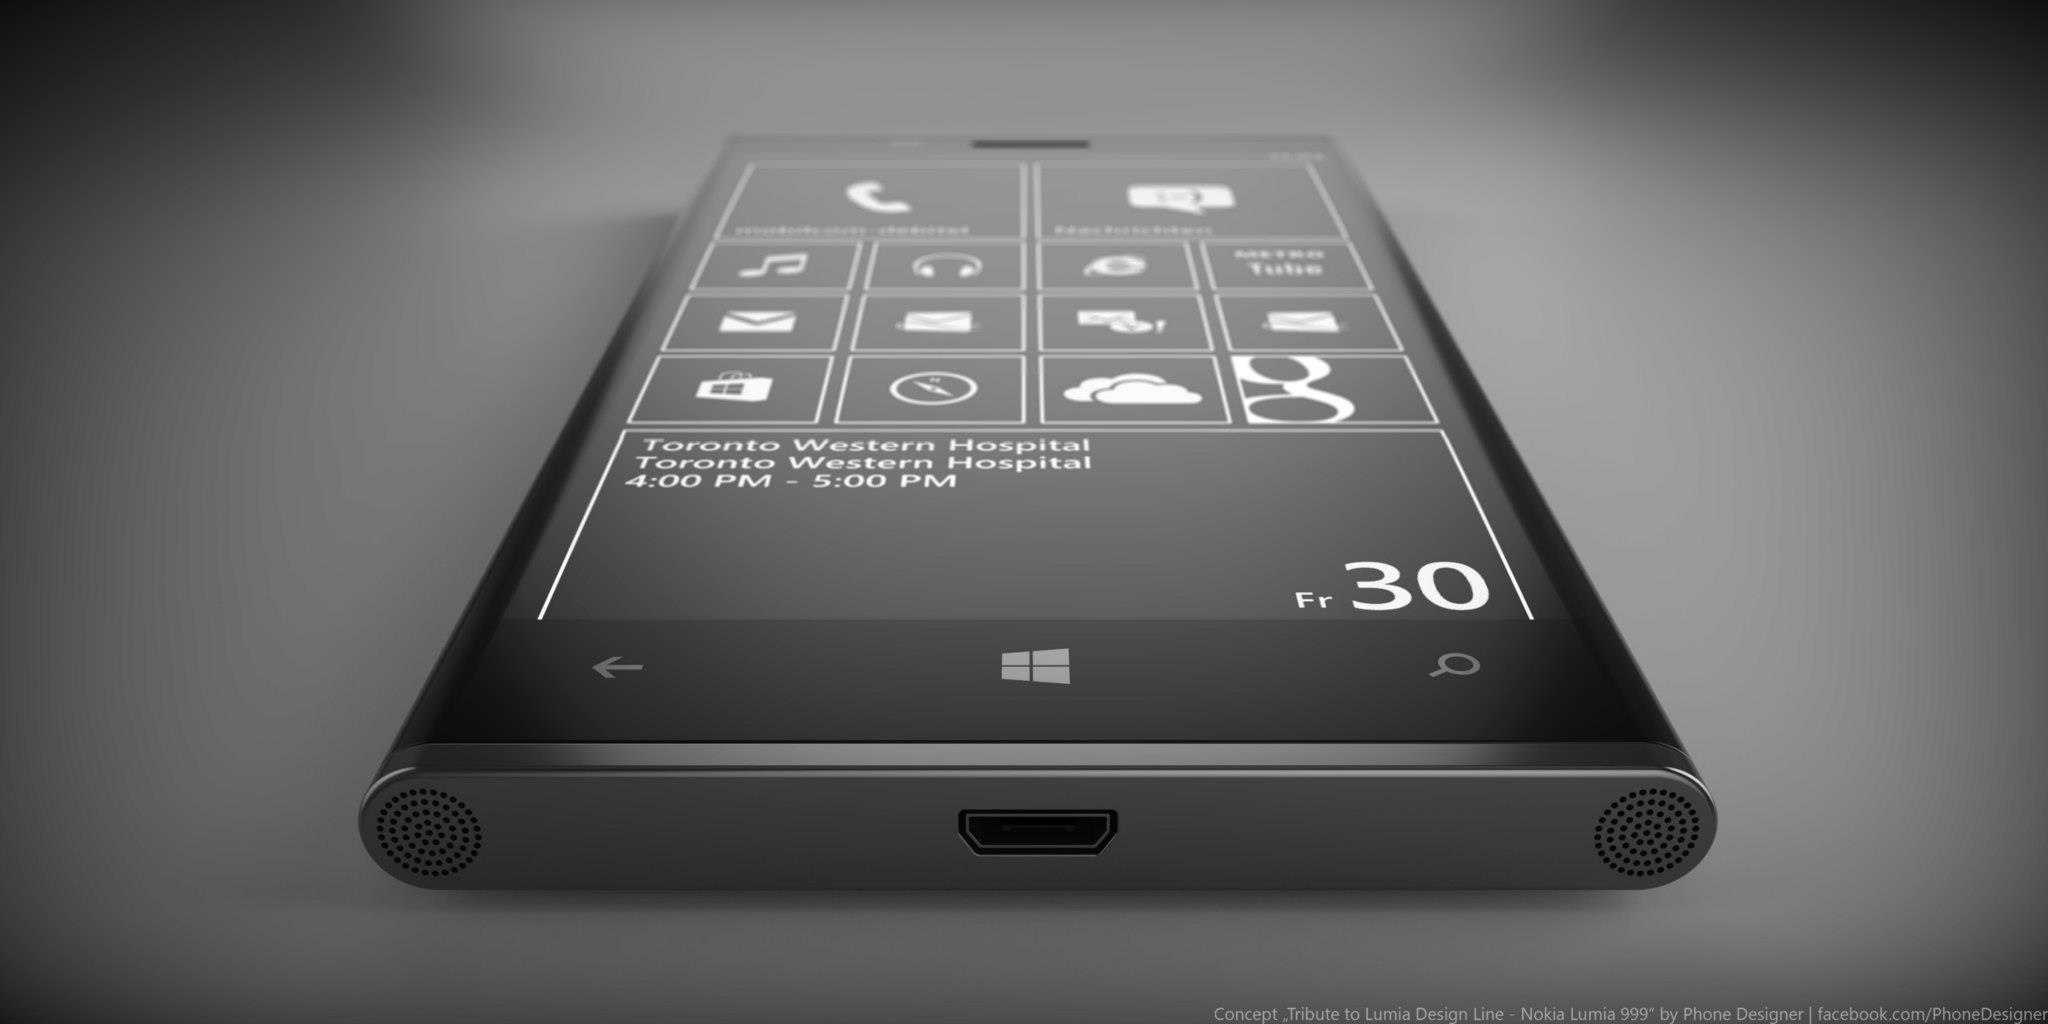 Nokia-Lumia-999-Concept-Phone-Looks-Great-from-All-Angles-8